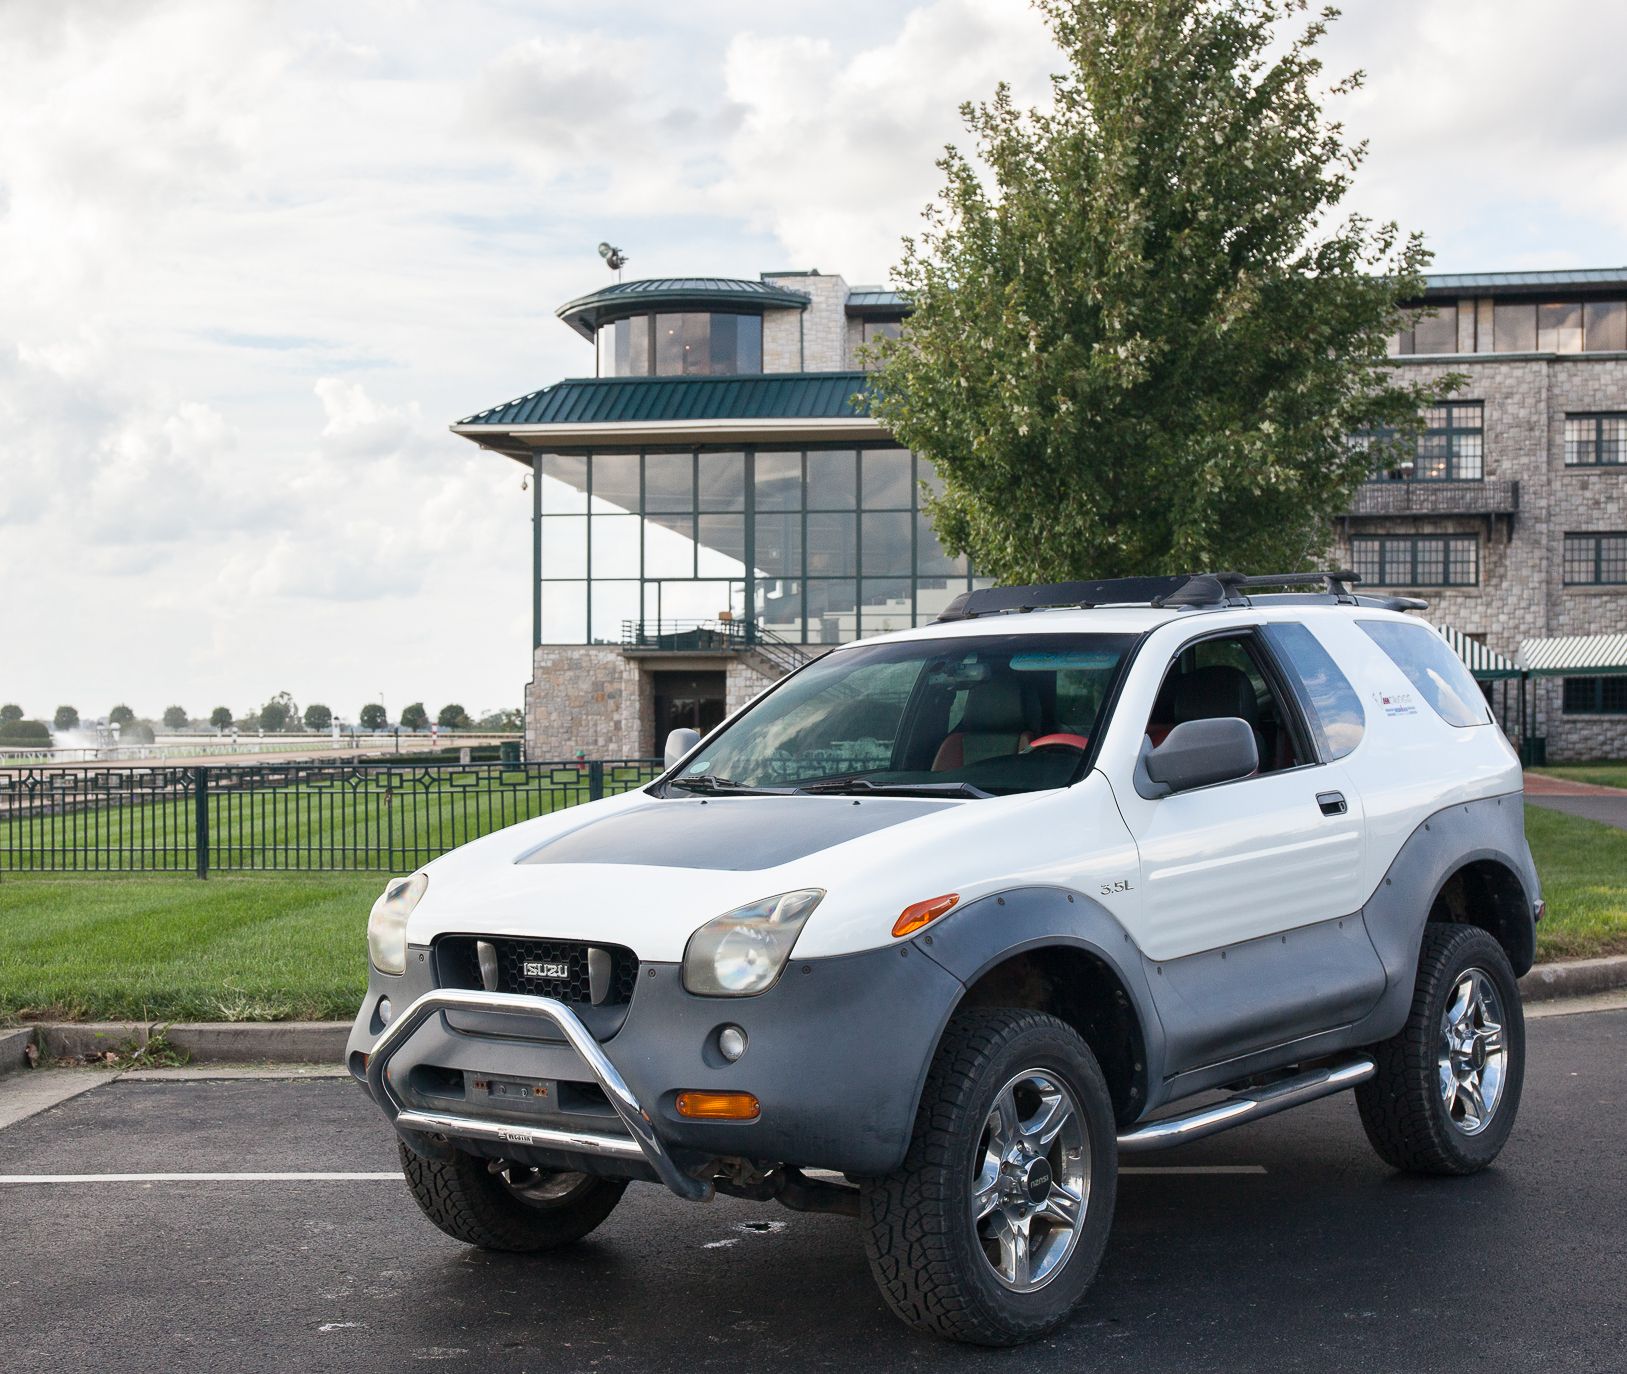 The 2001 Isuzu Vehicross is Reliable and Off-Road Ready